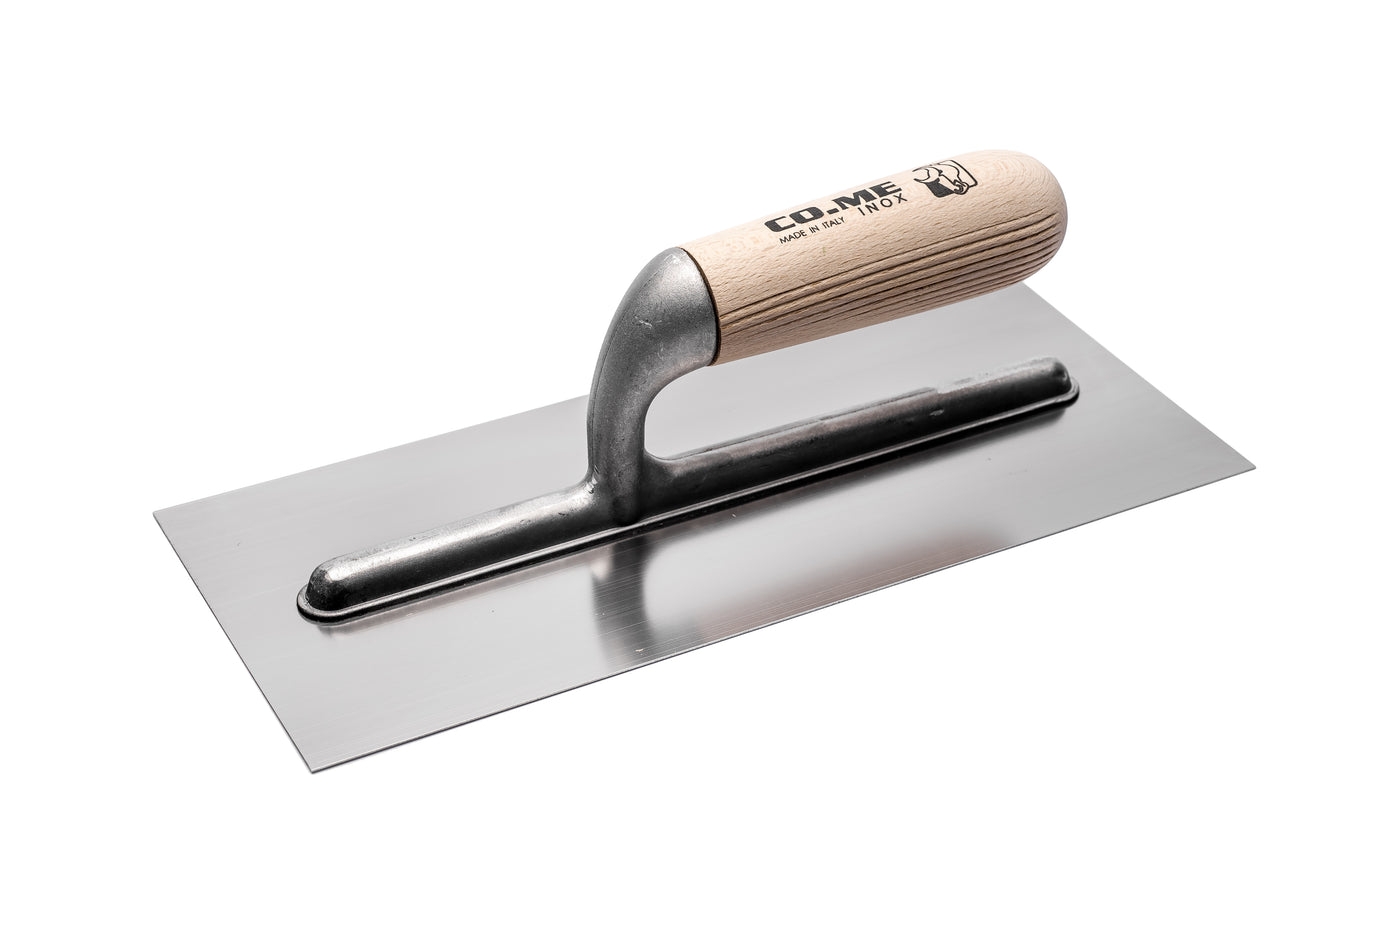 Square Plaster Finishing Trowel by Co.me (Stainless Steel, Wood Handle)